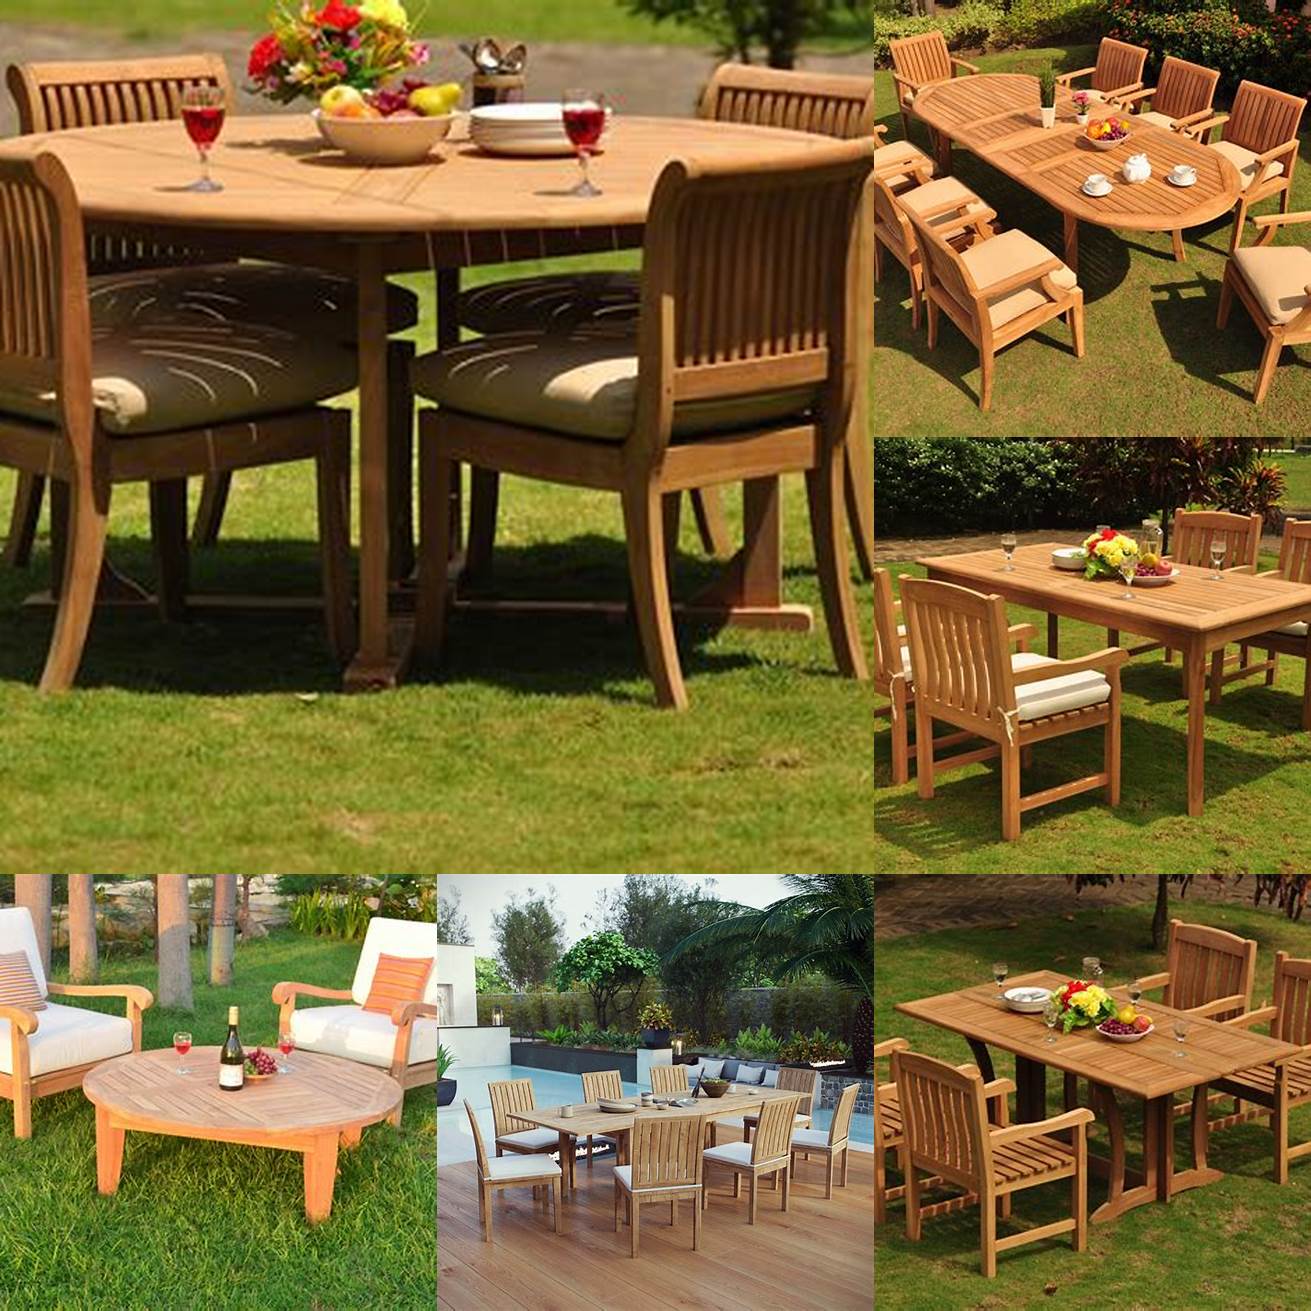 A photo of the teak furniture in different settings